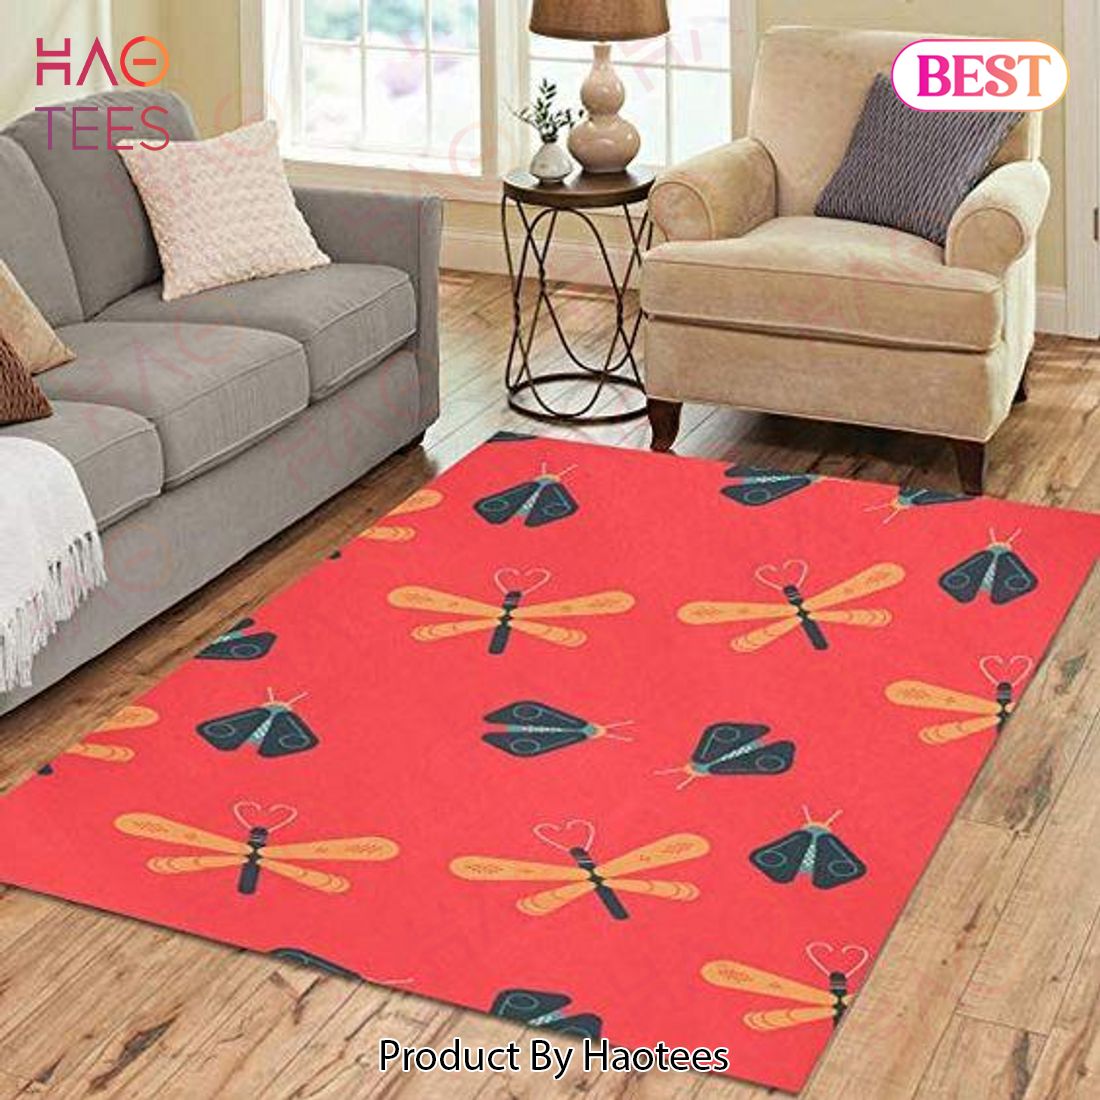 Dragonfly Limited Edition Area Rugs Carpet Mat Kitchen Rugs Floor Decor – KD31